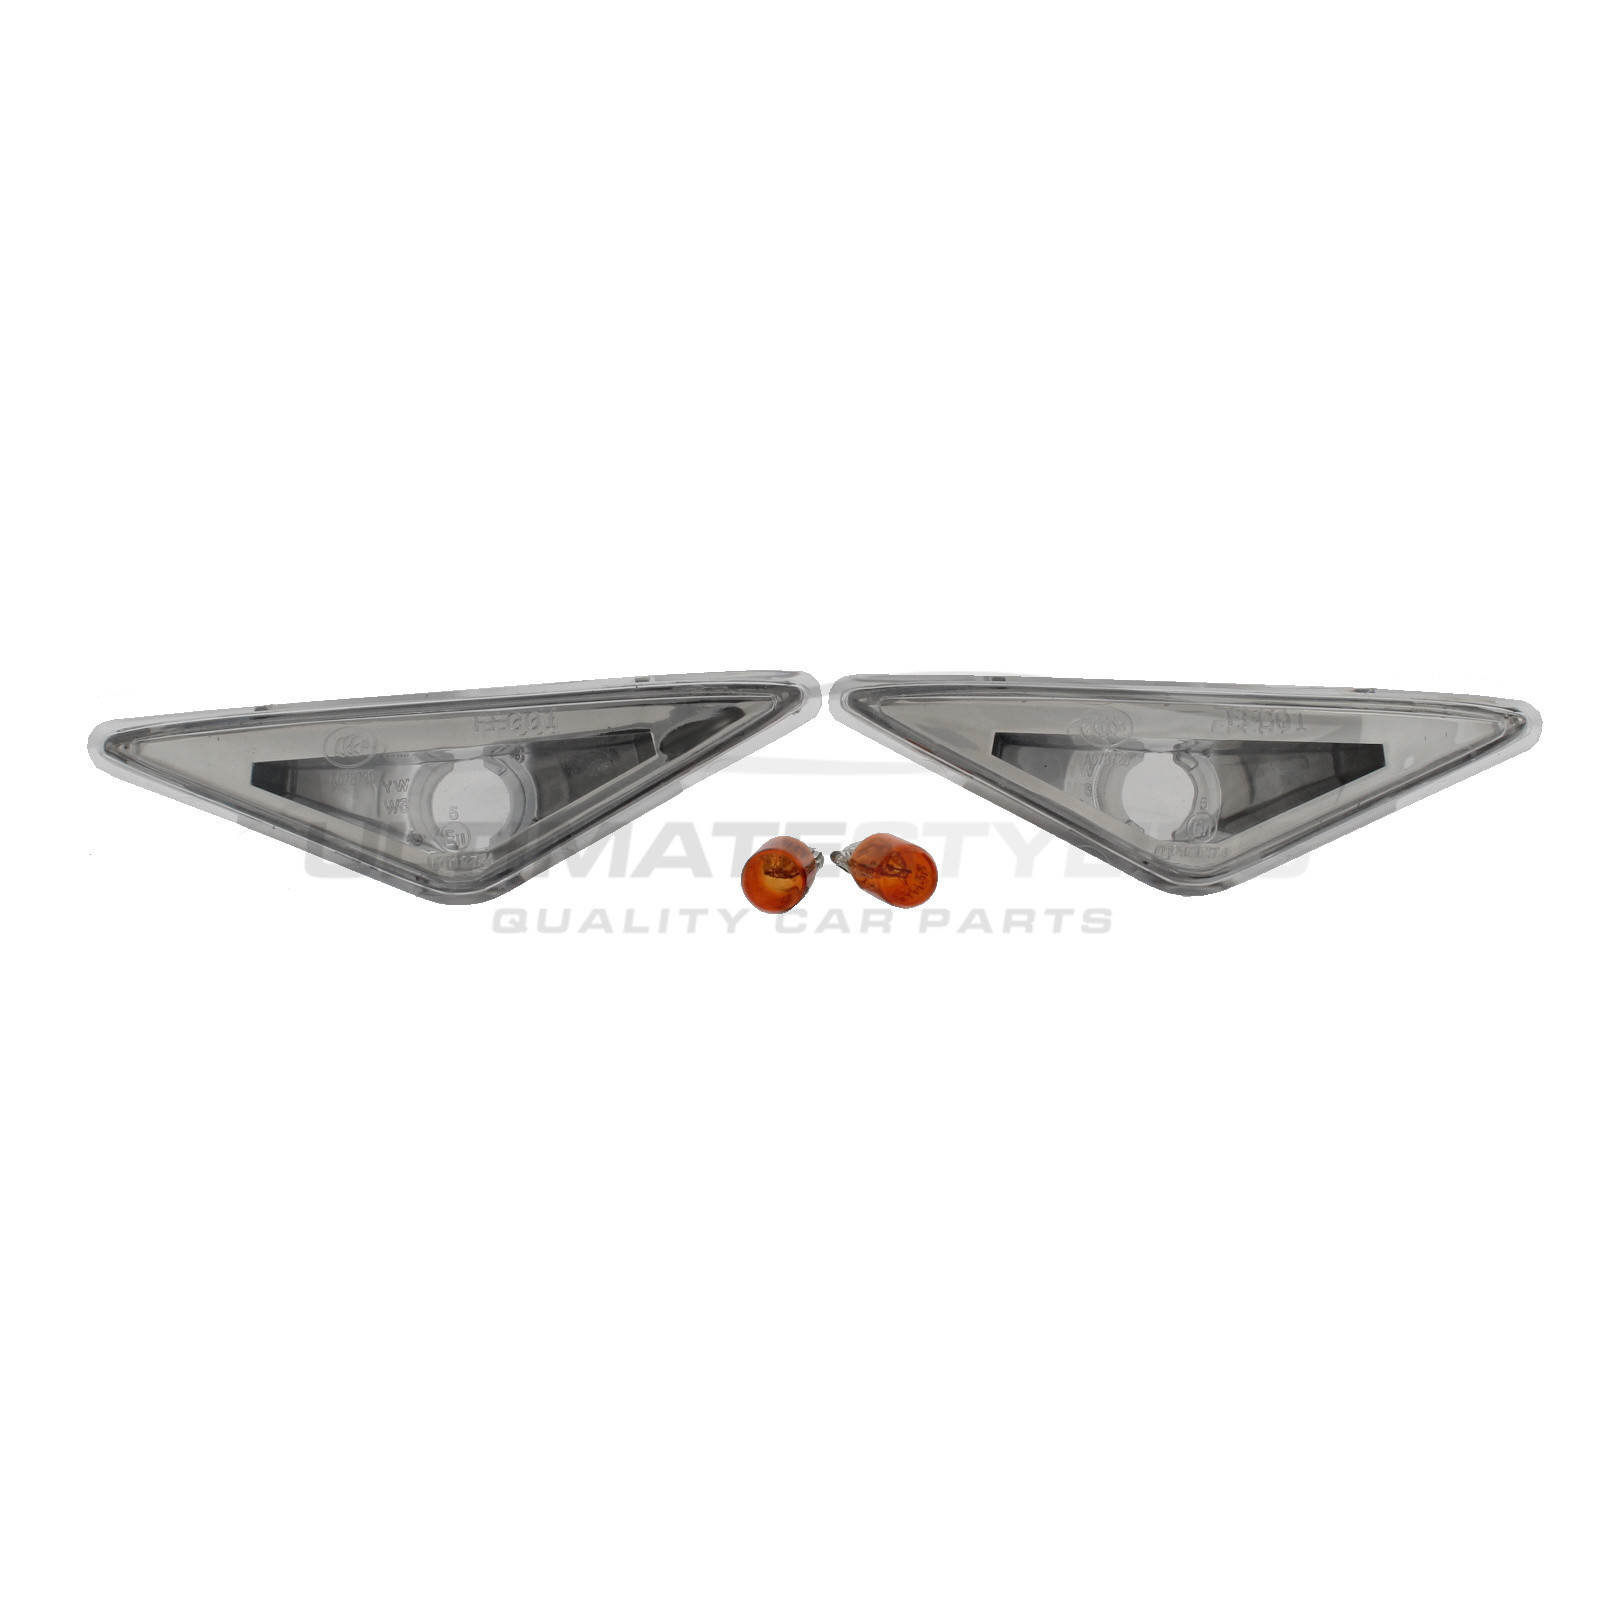 Ford Focus / Mondeo Side Repeaters - Pair (LH & RH) - Clear Lens lens - Non-LED